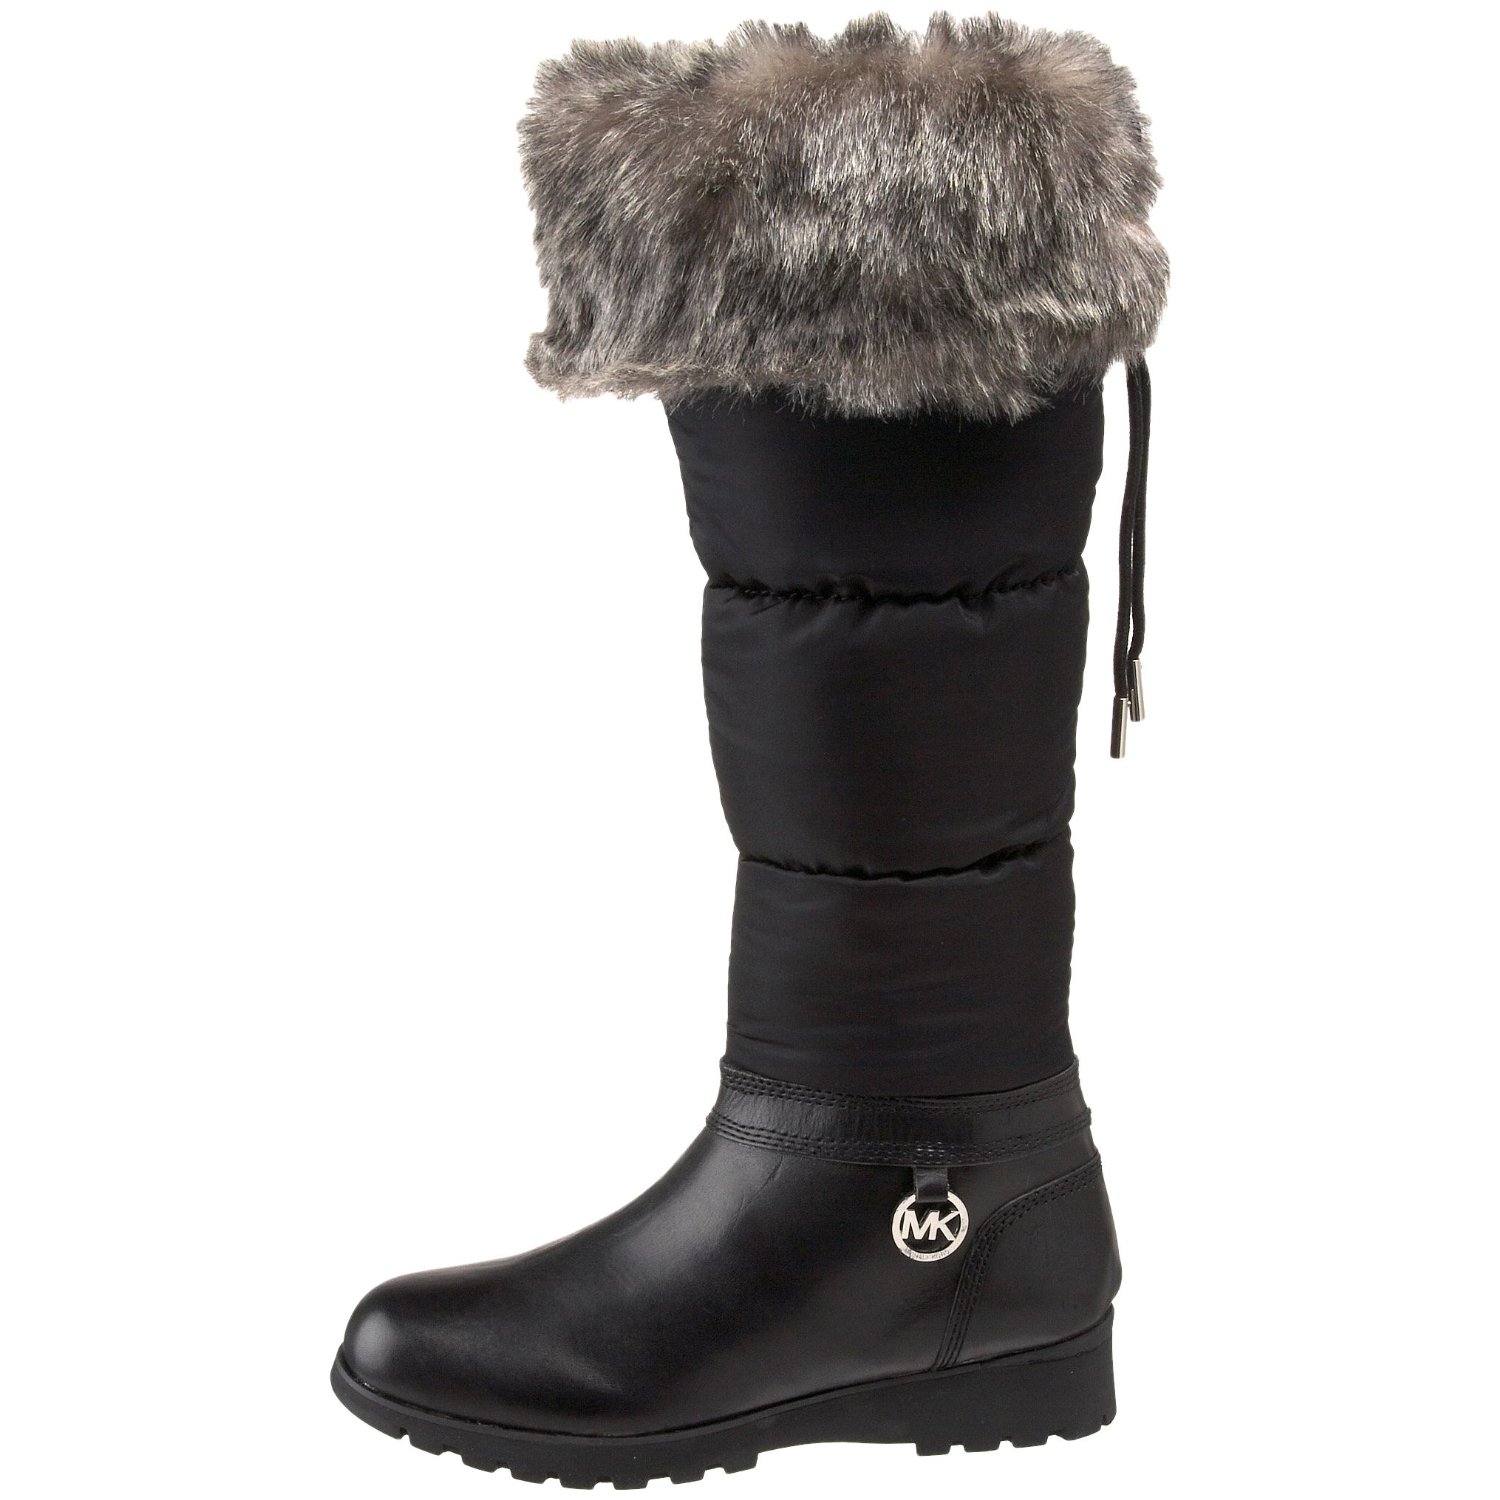 Michael Kors Winter Boots For Women | Division of Global Affairs